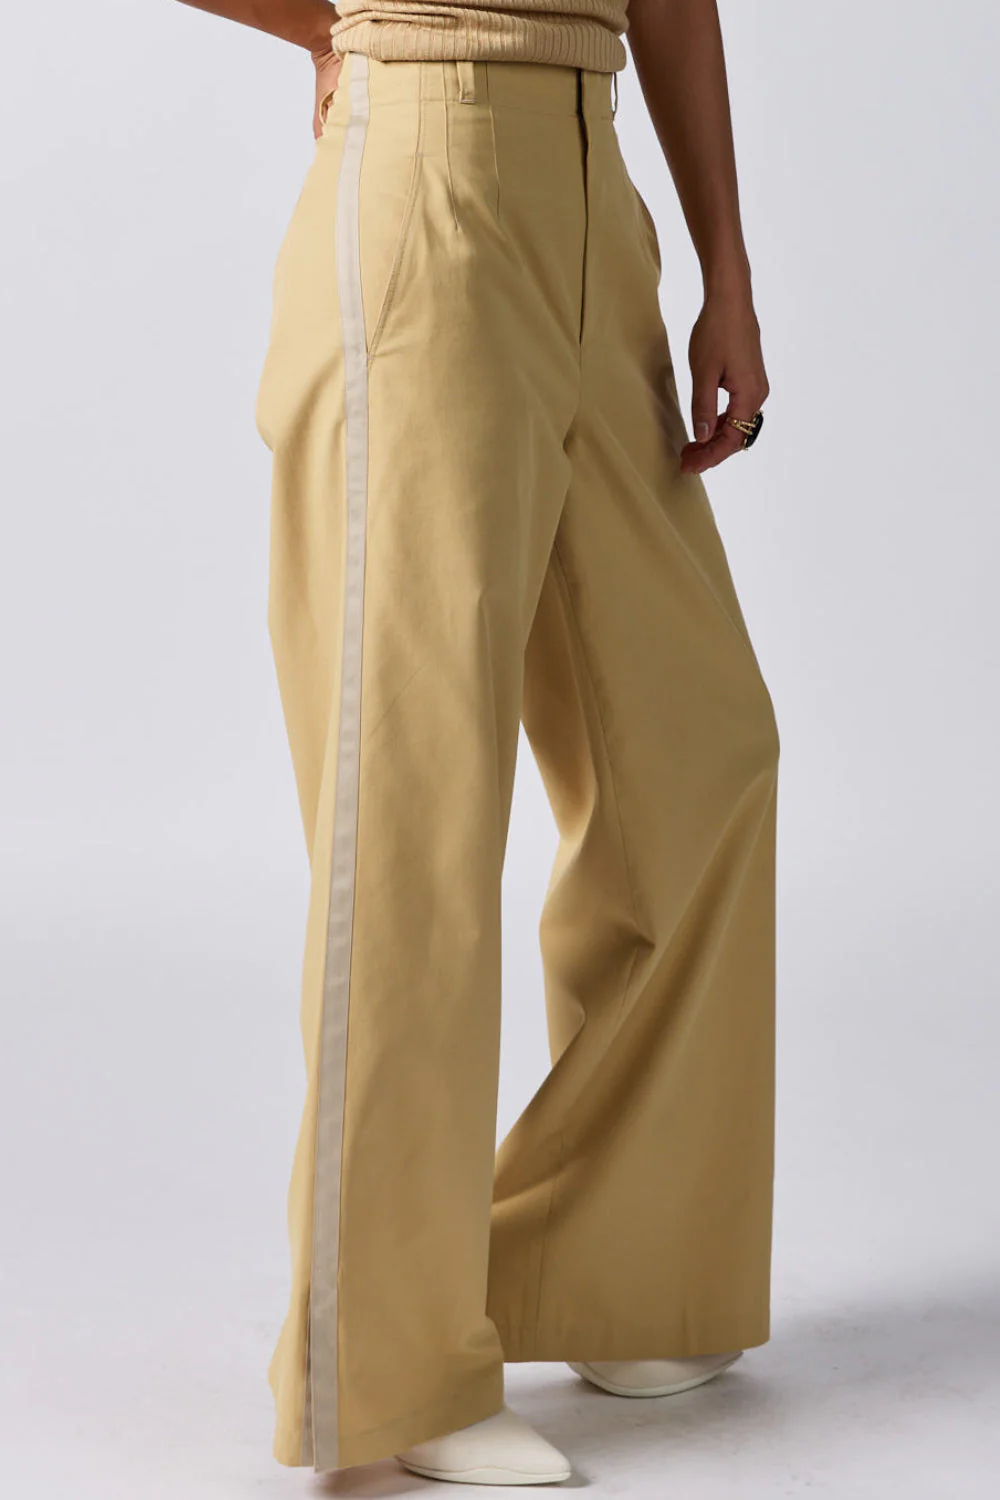 Dref By D Alarm Pant - Muted Gold